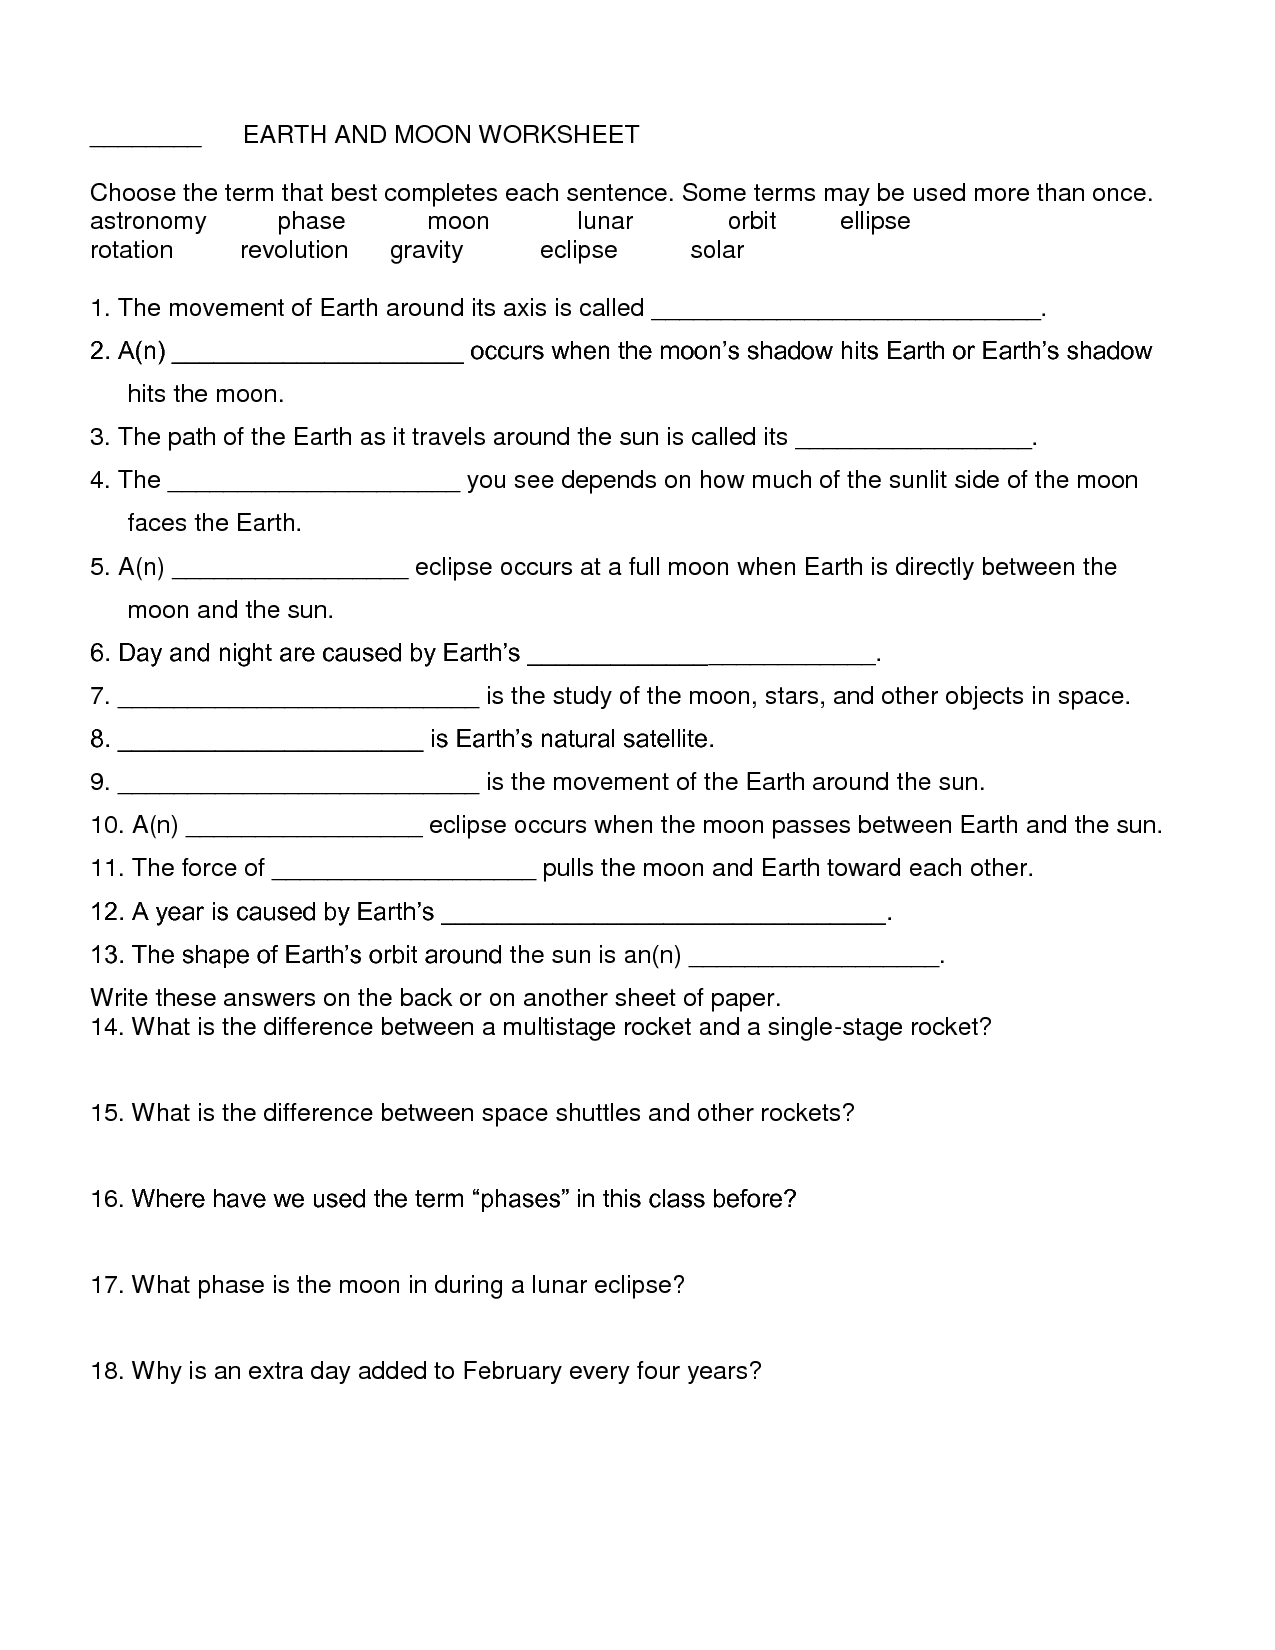 7-best-images-of-earth-and-sun-worksheets-earth-sun-and-moon-worksheets-the-sun-earth-moon